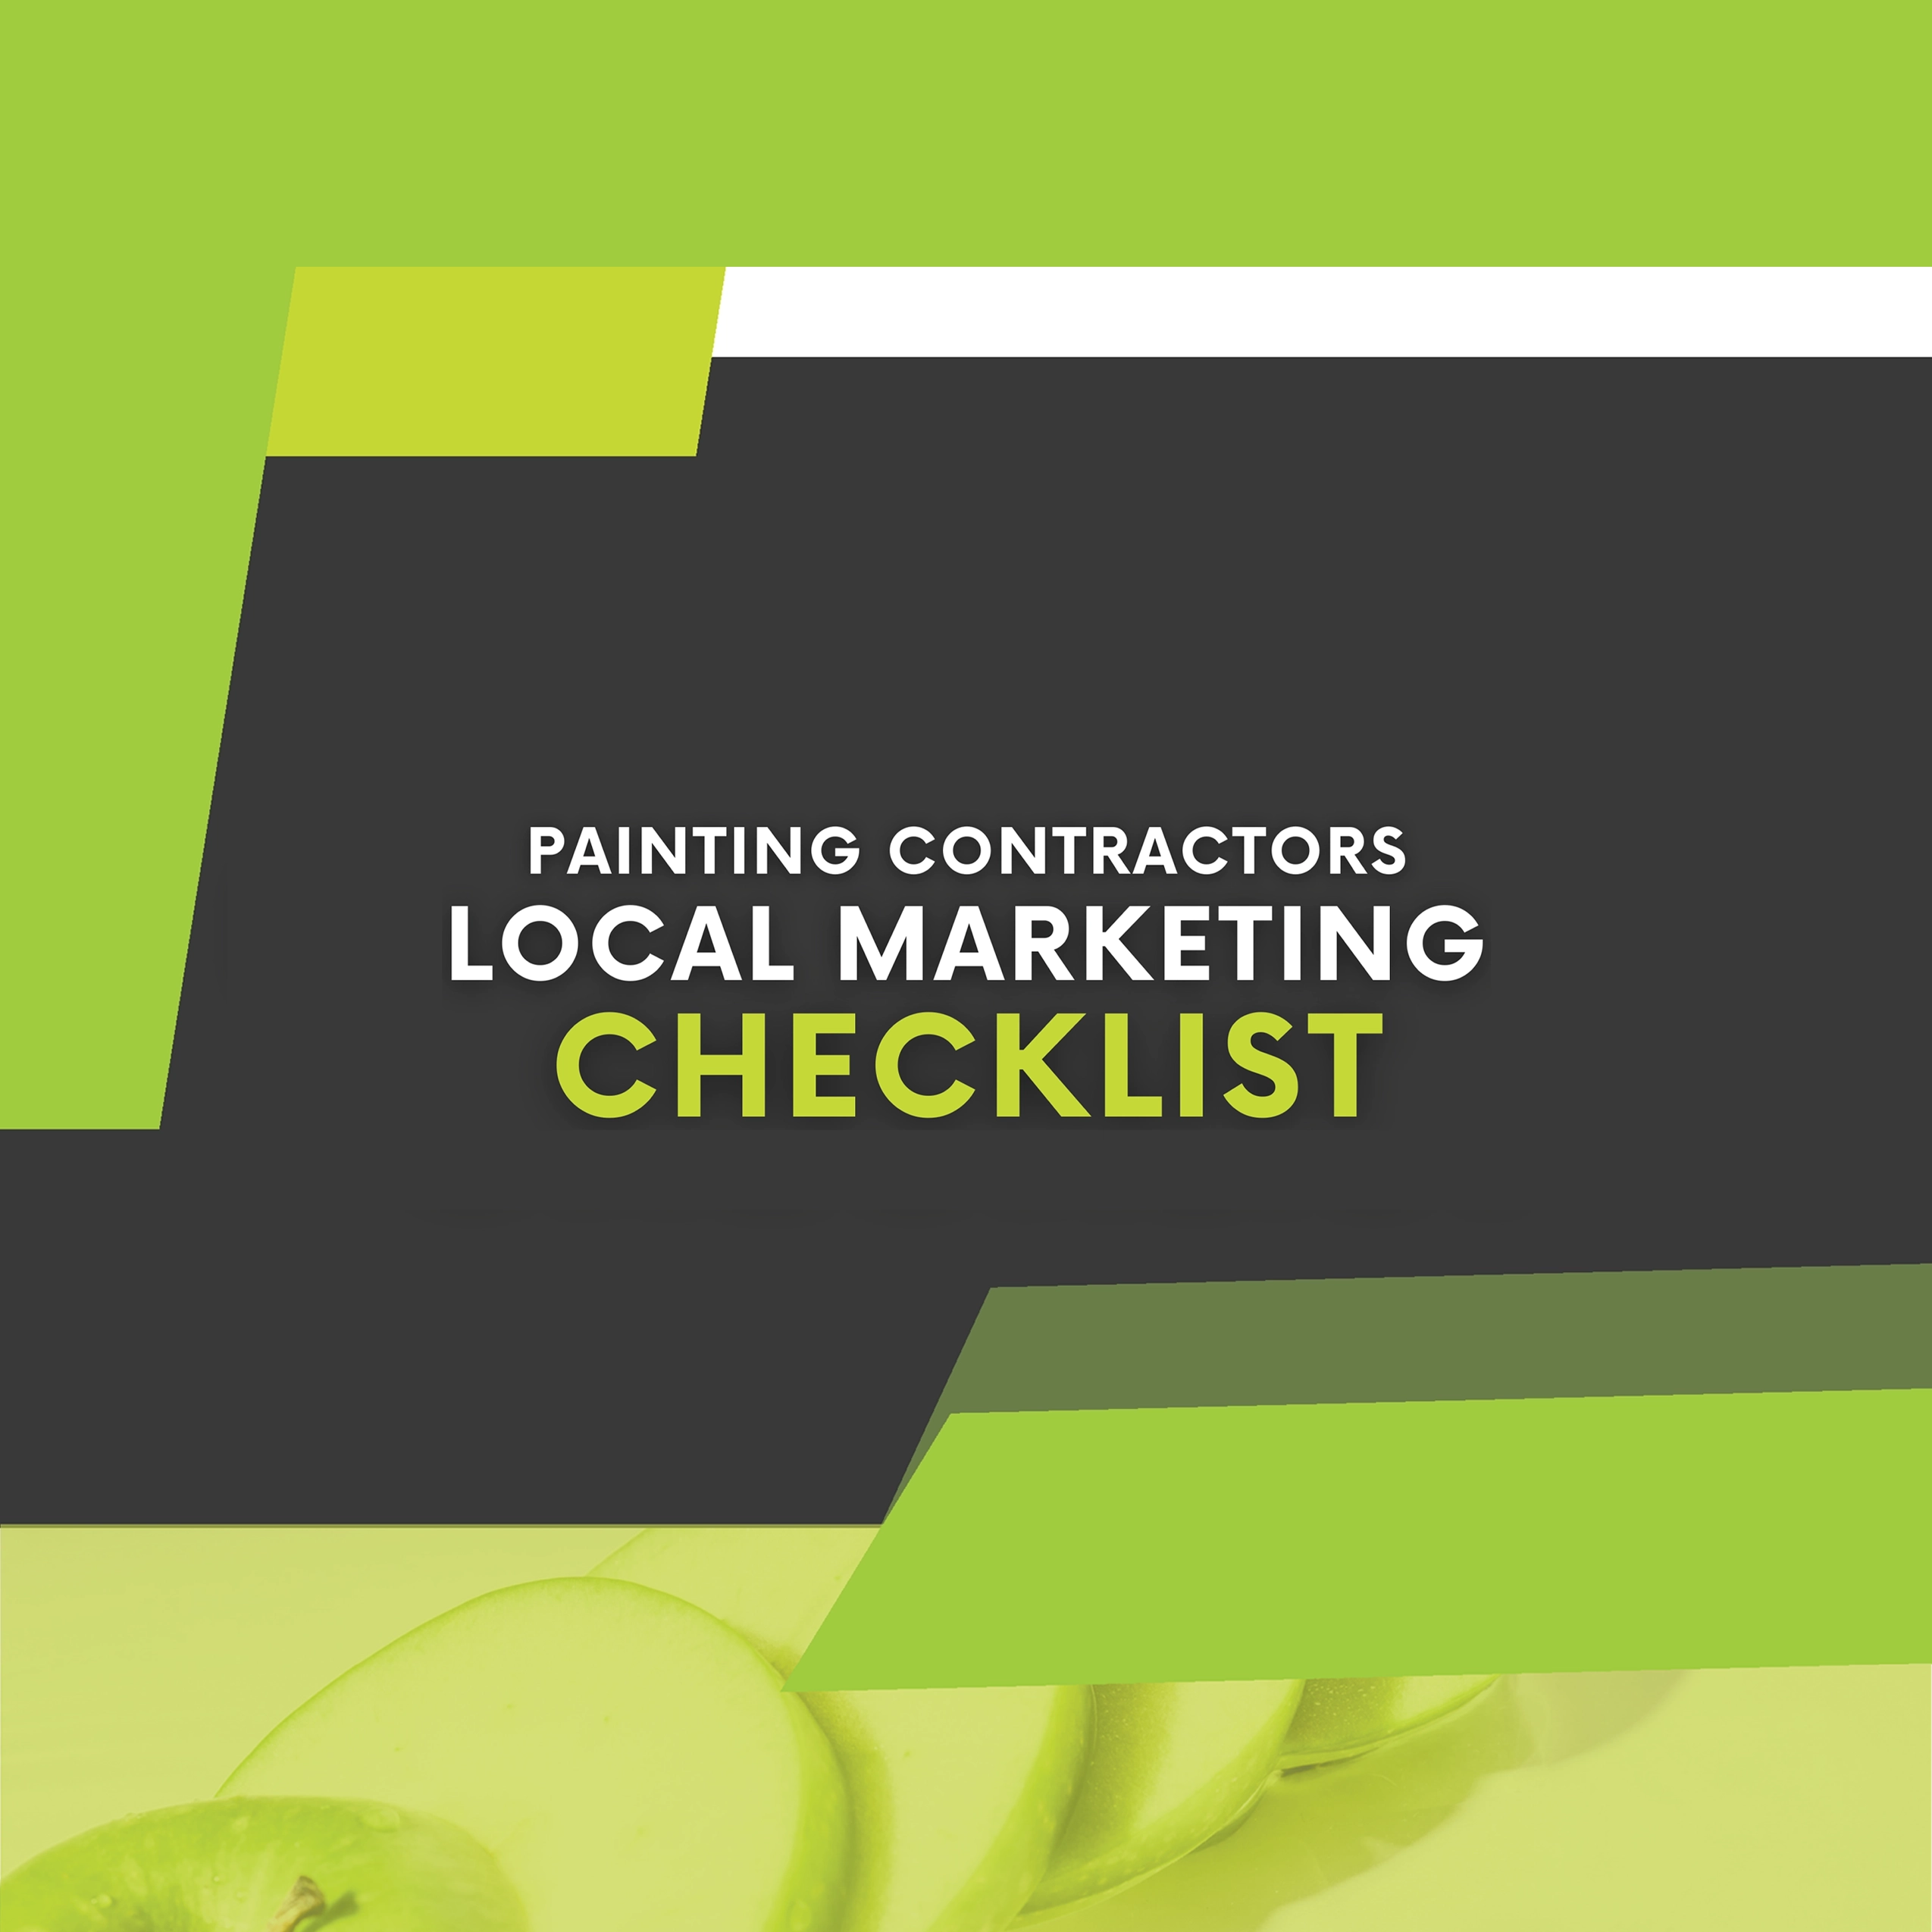 Painting Contractors Local Marketing Checklist Page update cover 2